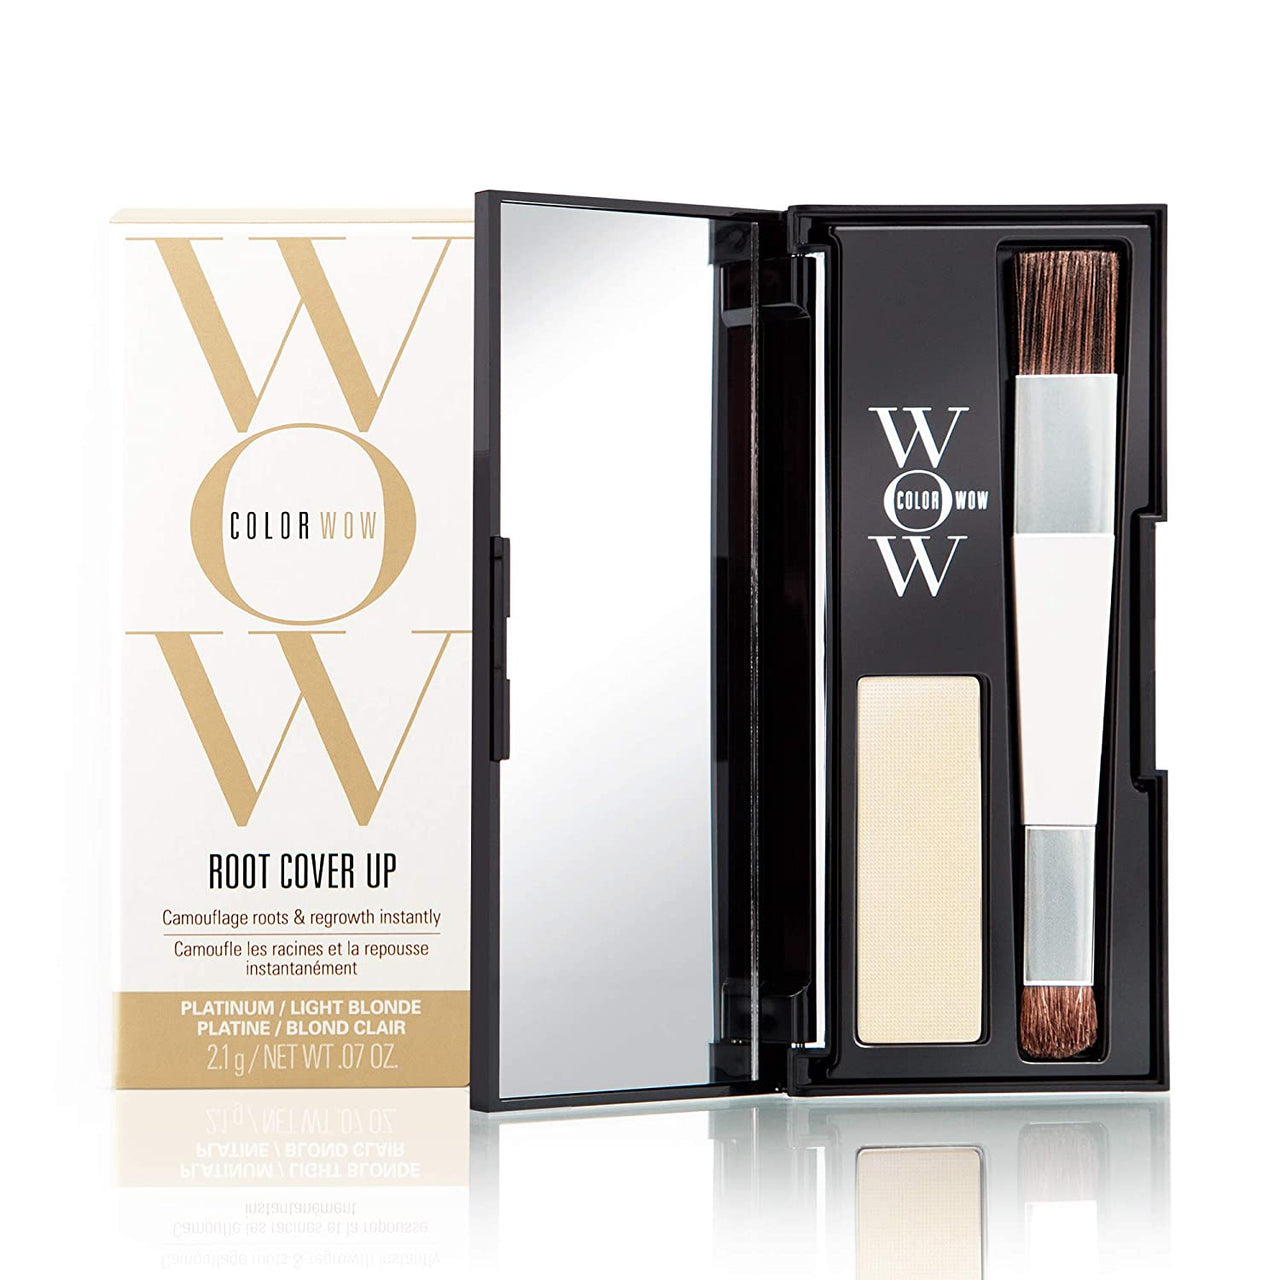 COLOR WOW_Platinum / Light Blonde - Root Cover up_Cosmetic World